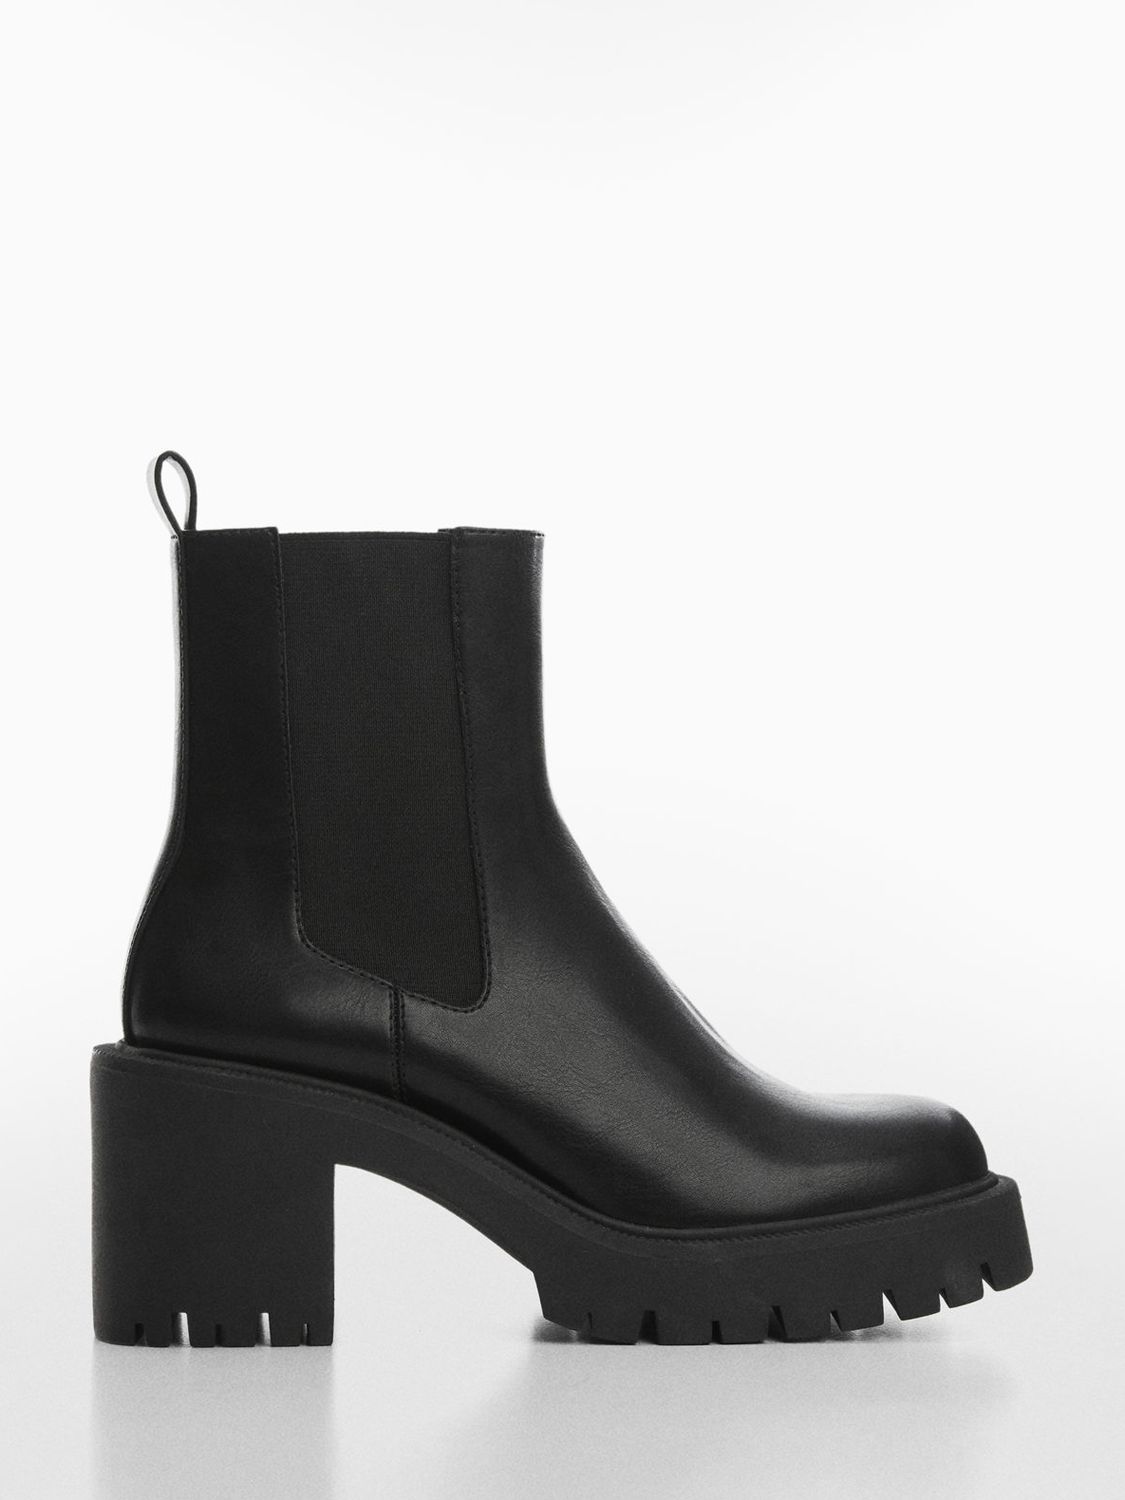 Mango Torna Ankle Boots, Black at John Lewis & Partners